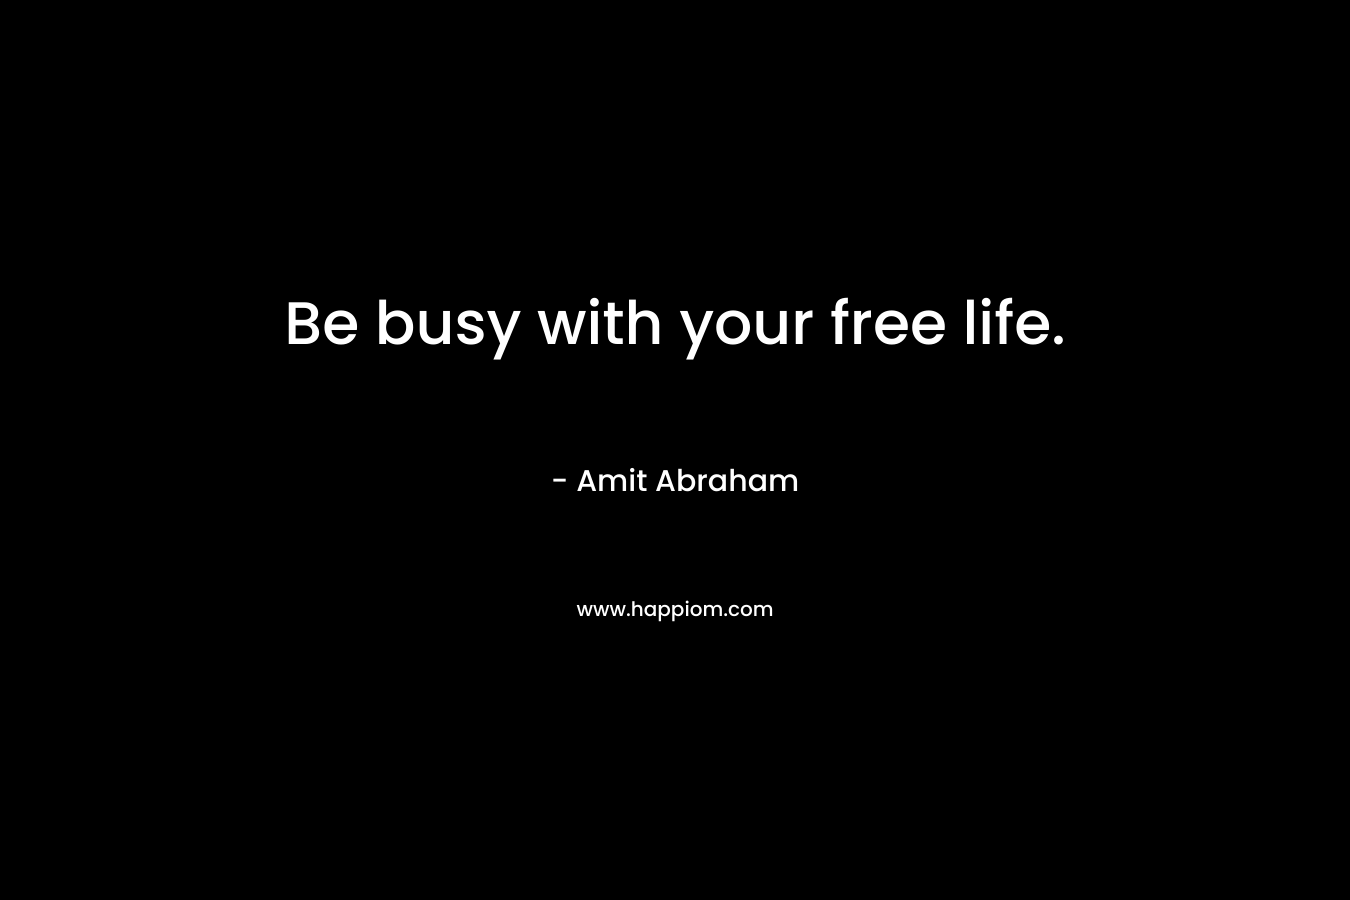 Be busy with your free life.